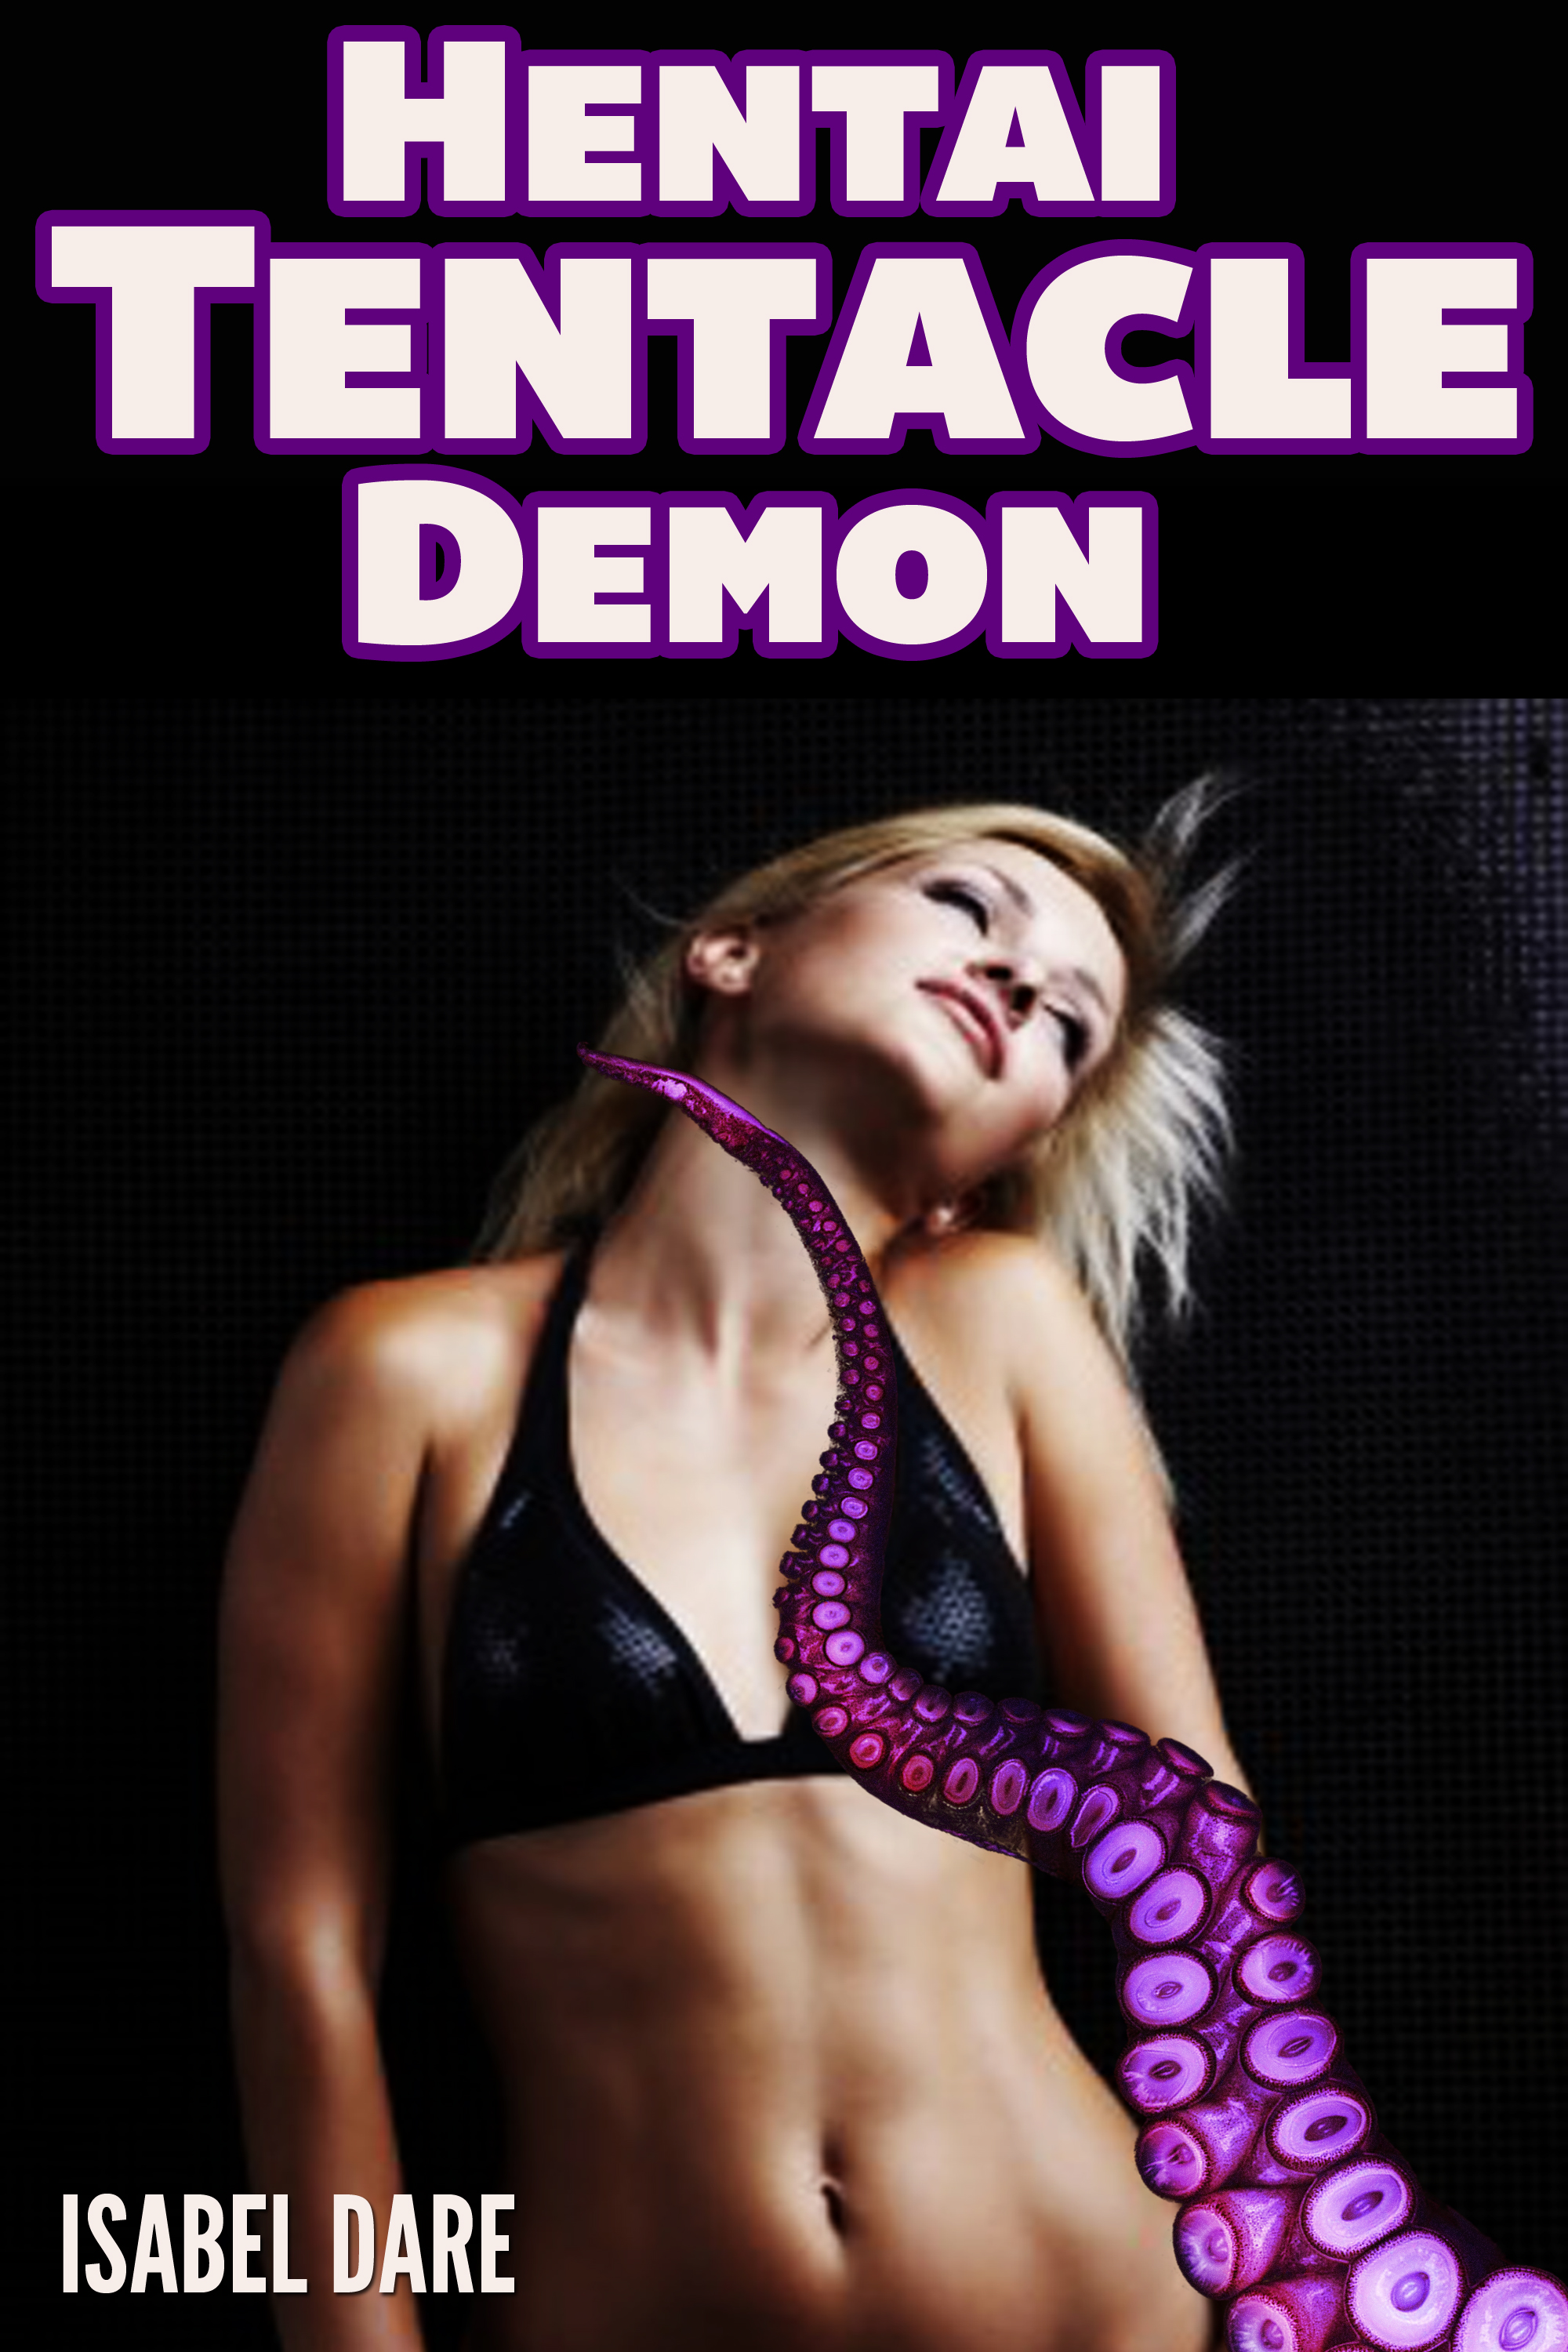 Real Life Tentacle Monster Porn - Hentai Tentacle Demon (Tentacle Monster Erotica), an Ebook by Isabel Dare